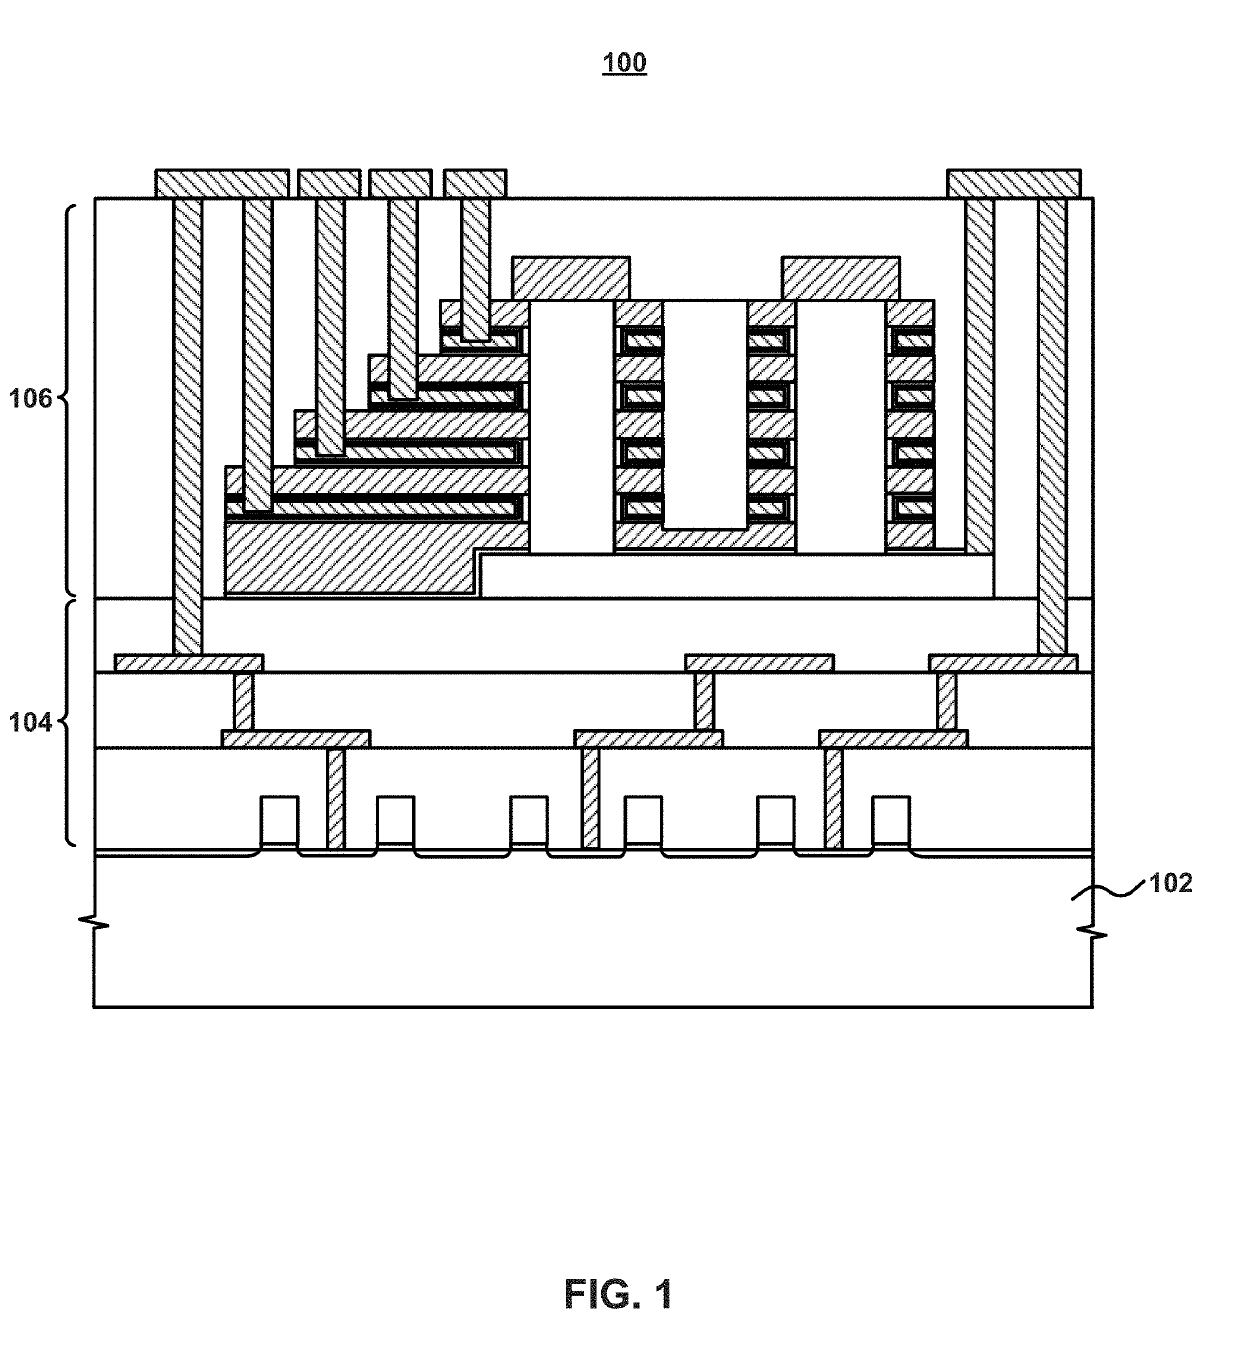 Three-dimensional memory devices having a plurality of NAND strings